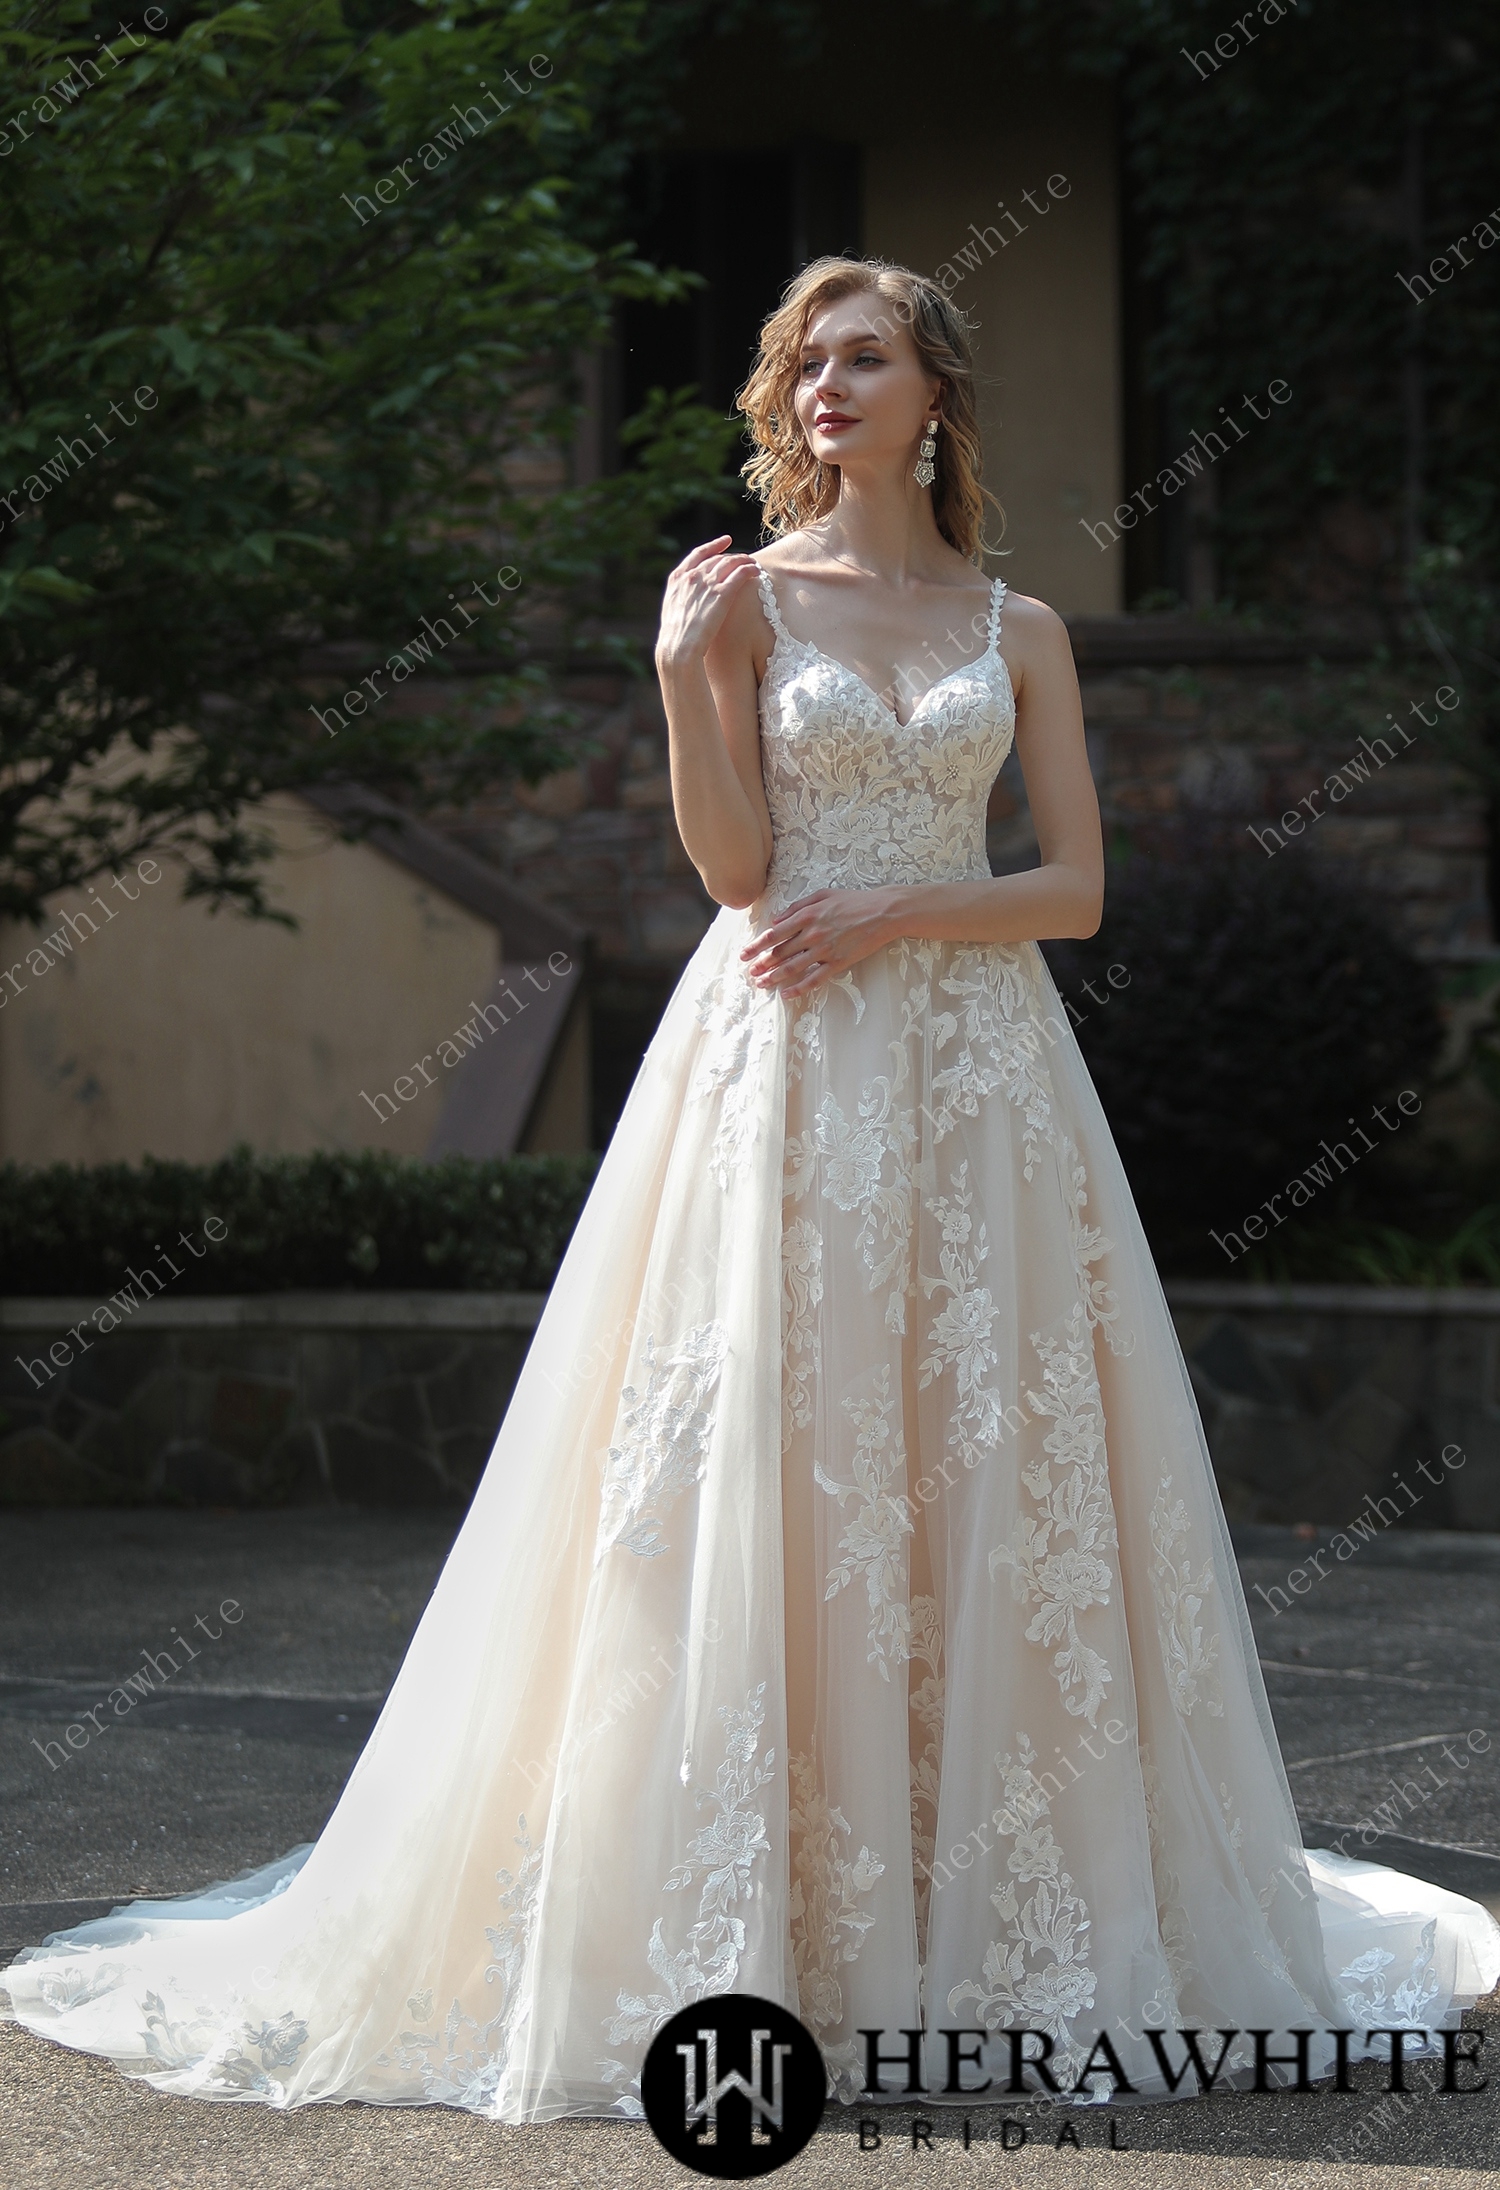 Ethereal A-Line Wedding Dress With Frosted  Flower Lace